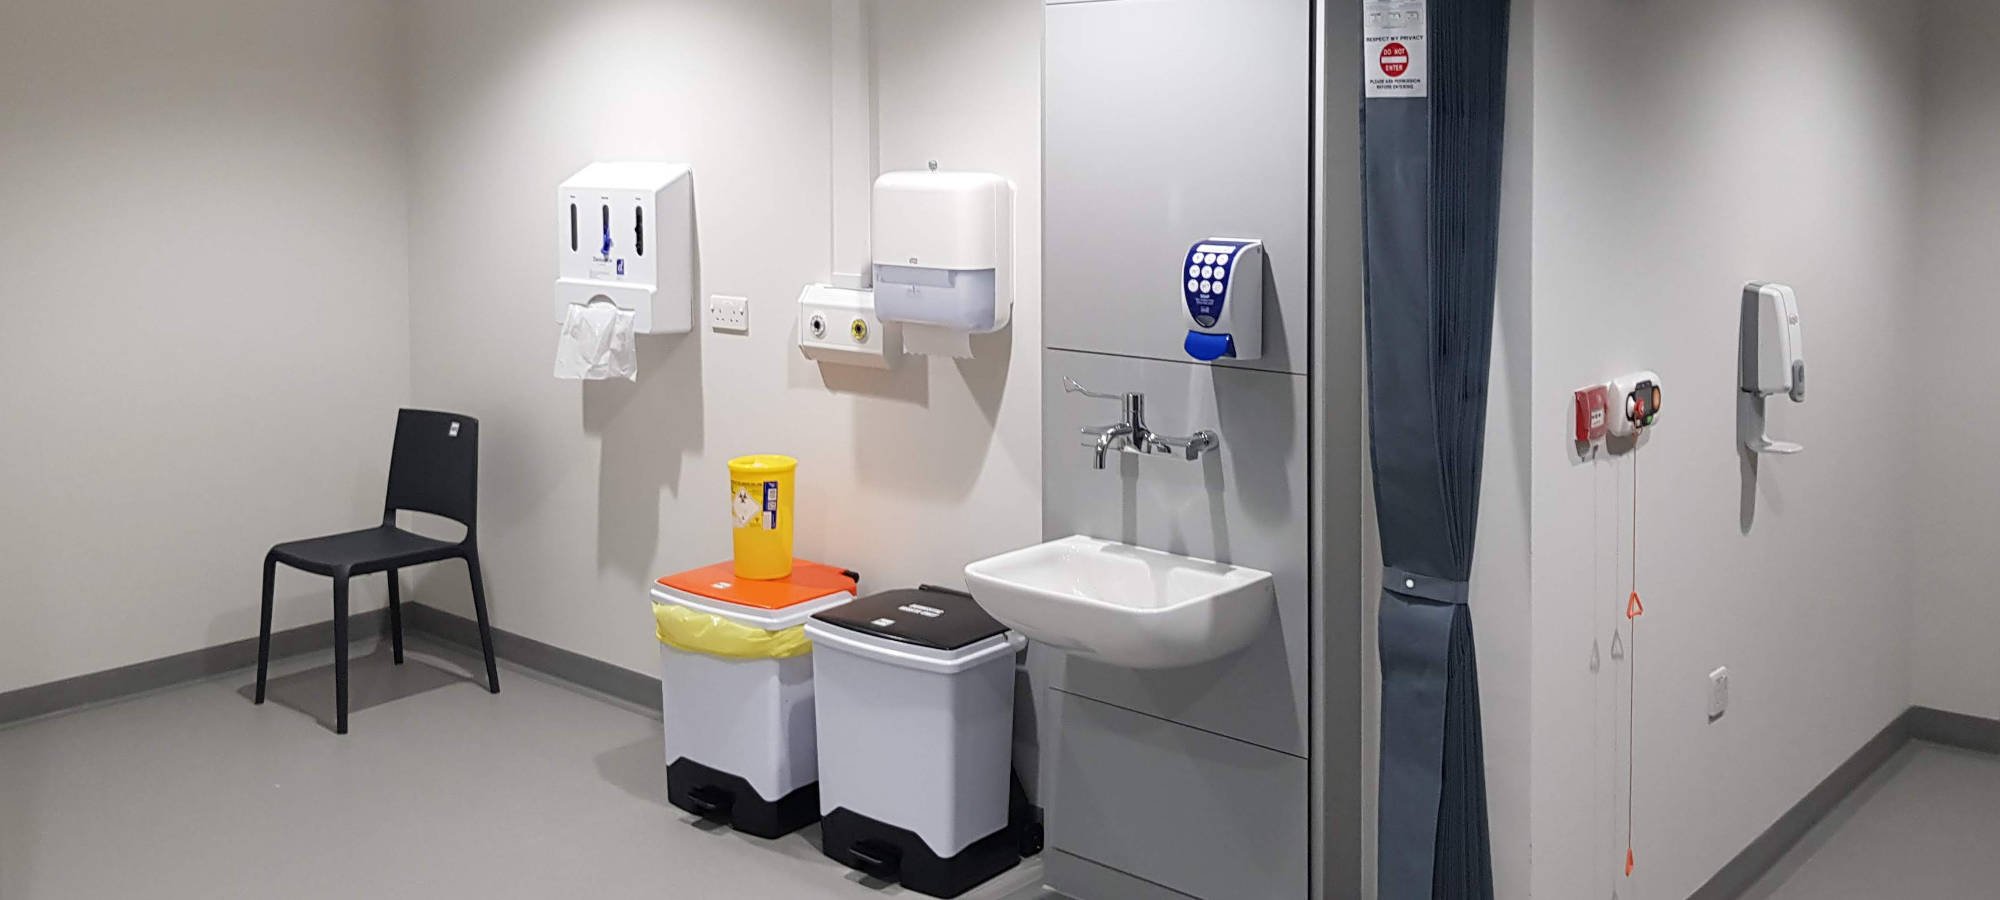 This Burnley MRI scanner facility was specified and supplied by Imaging Matters